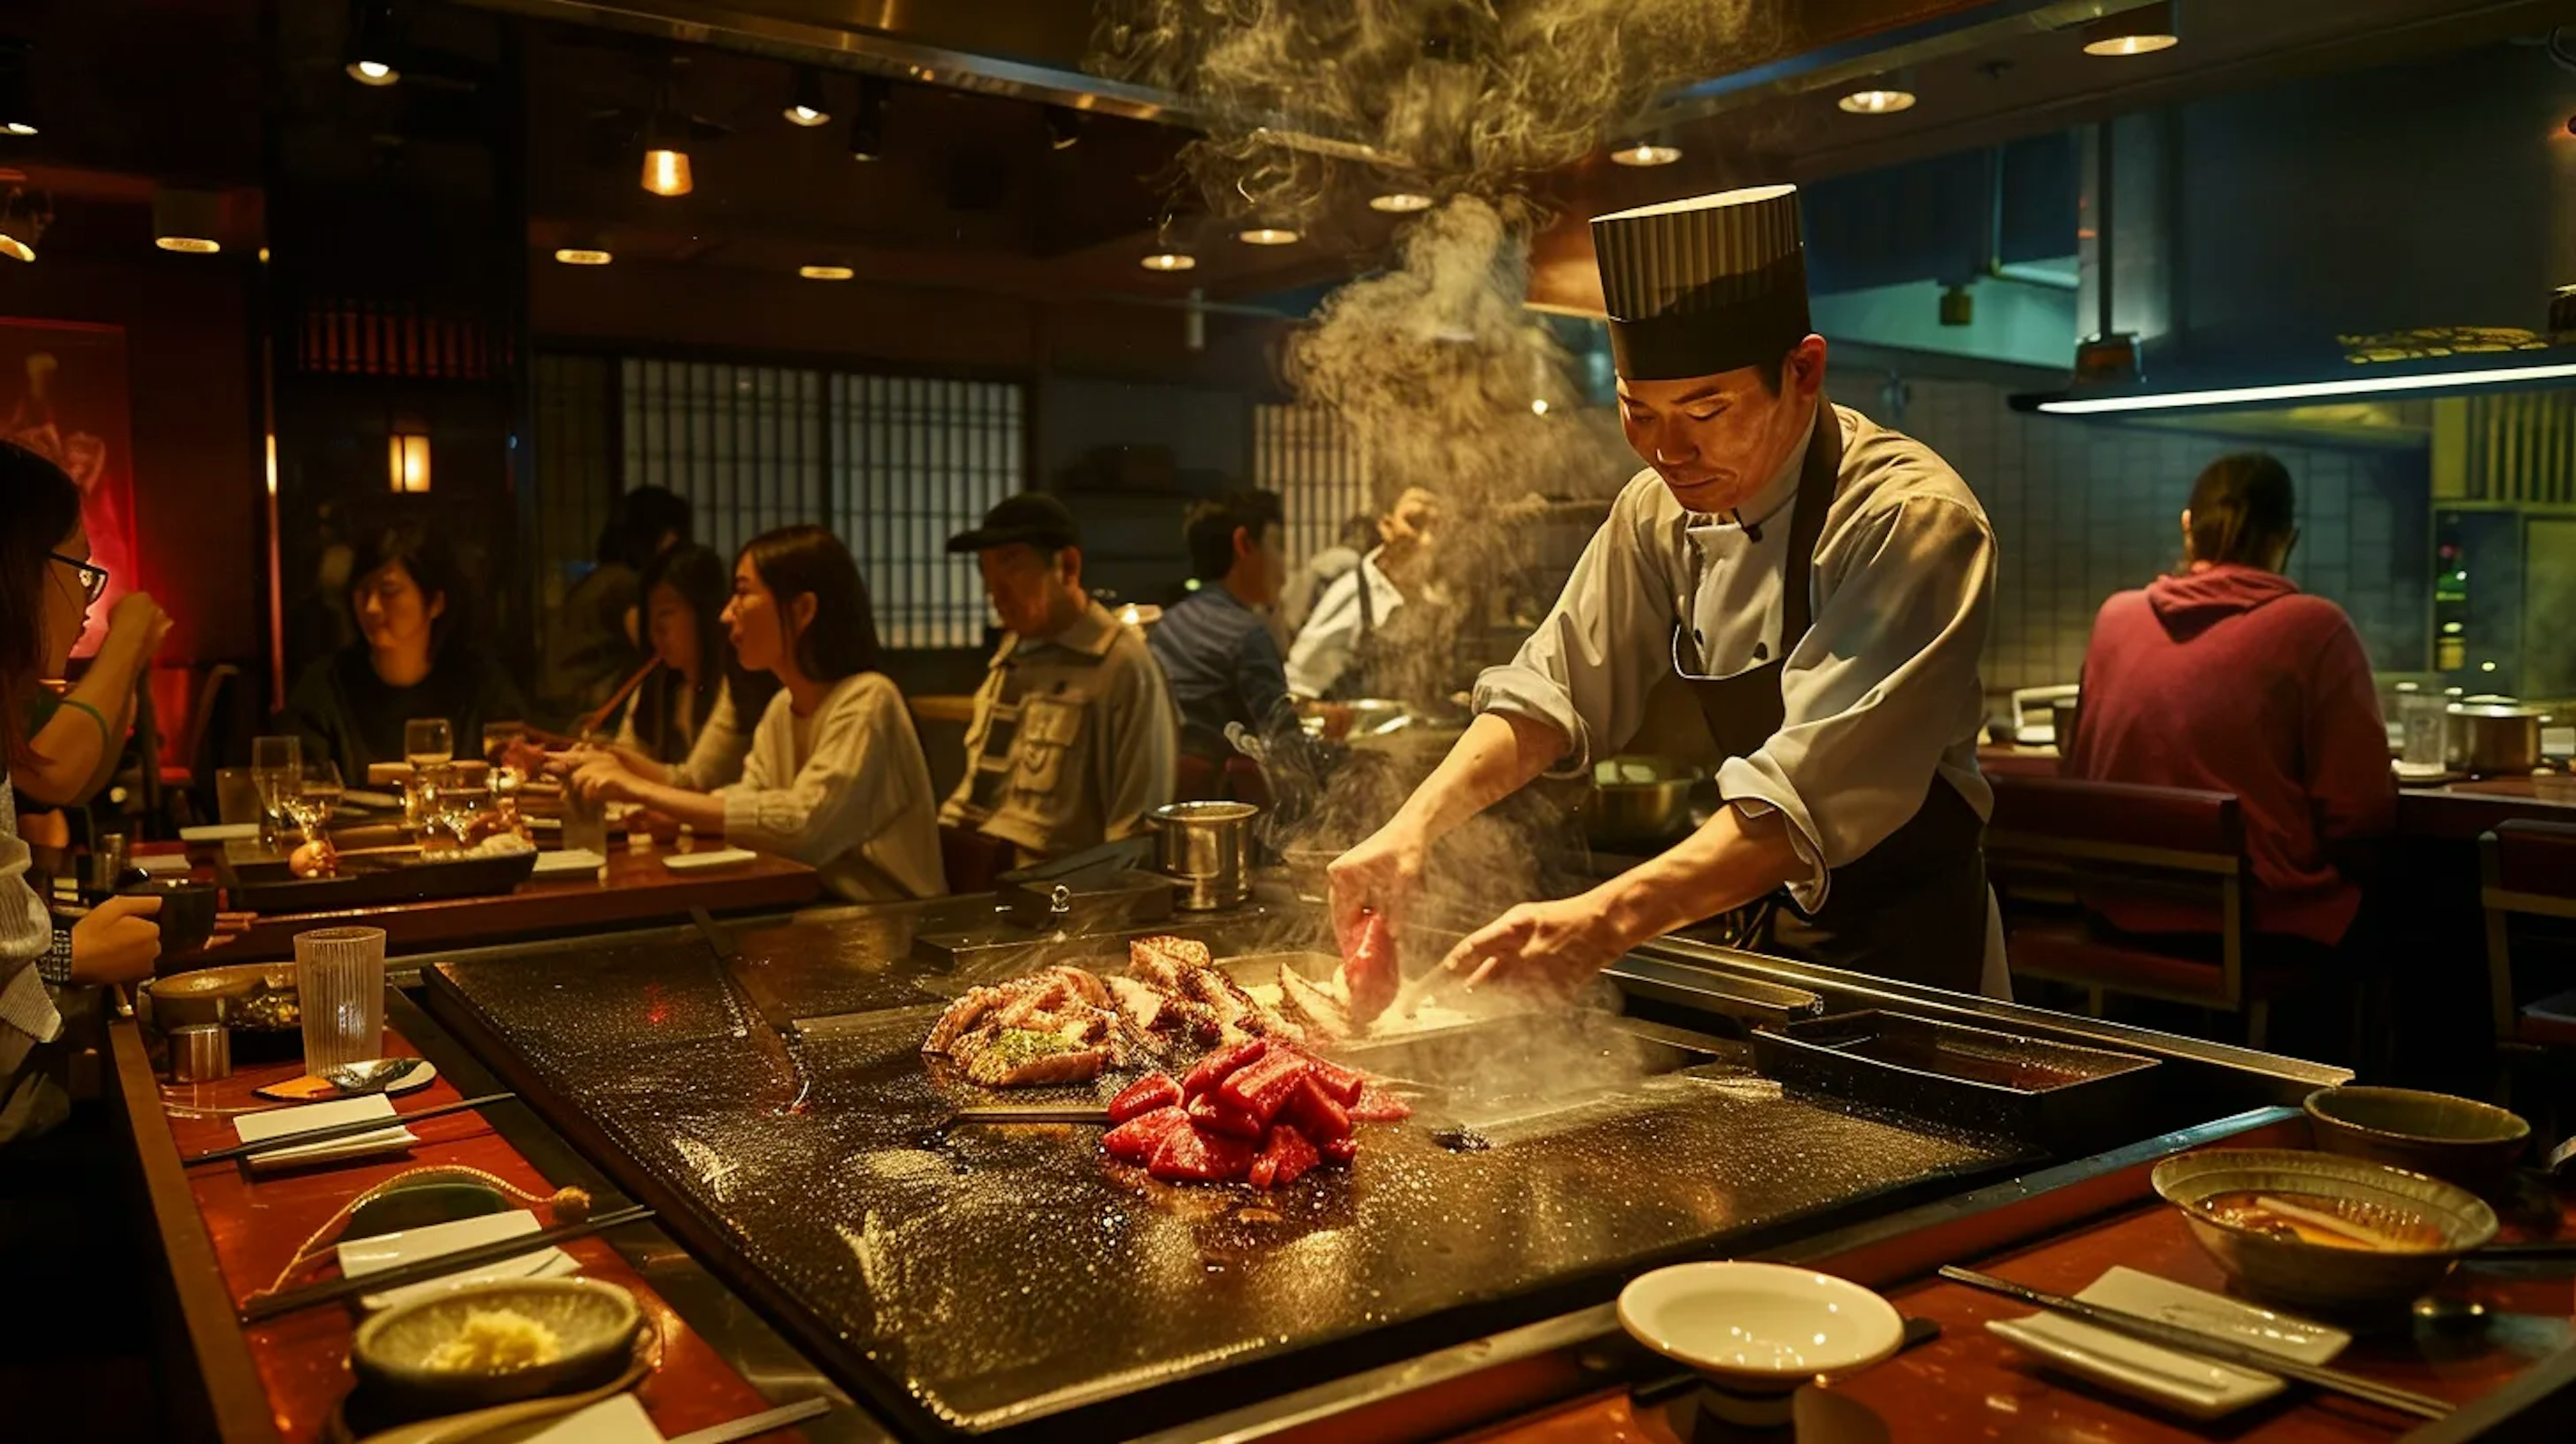 Teppanyaki chef preparing meats and vegetables on a large flat grill, with guests watching the engaging culinary performance